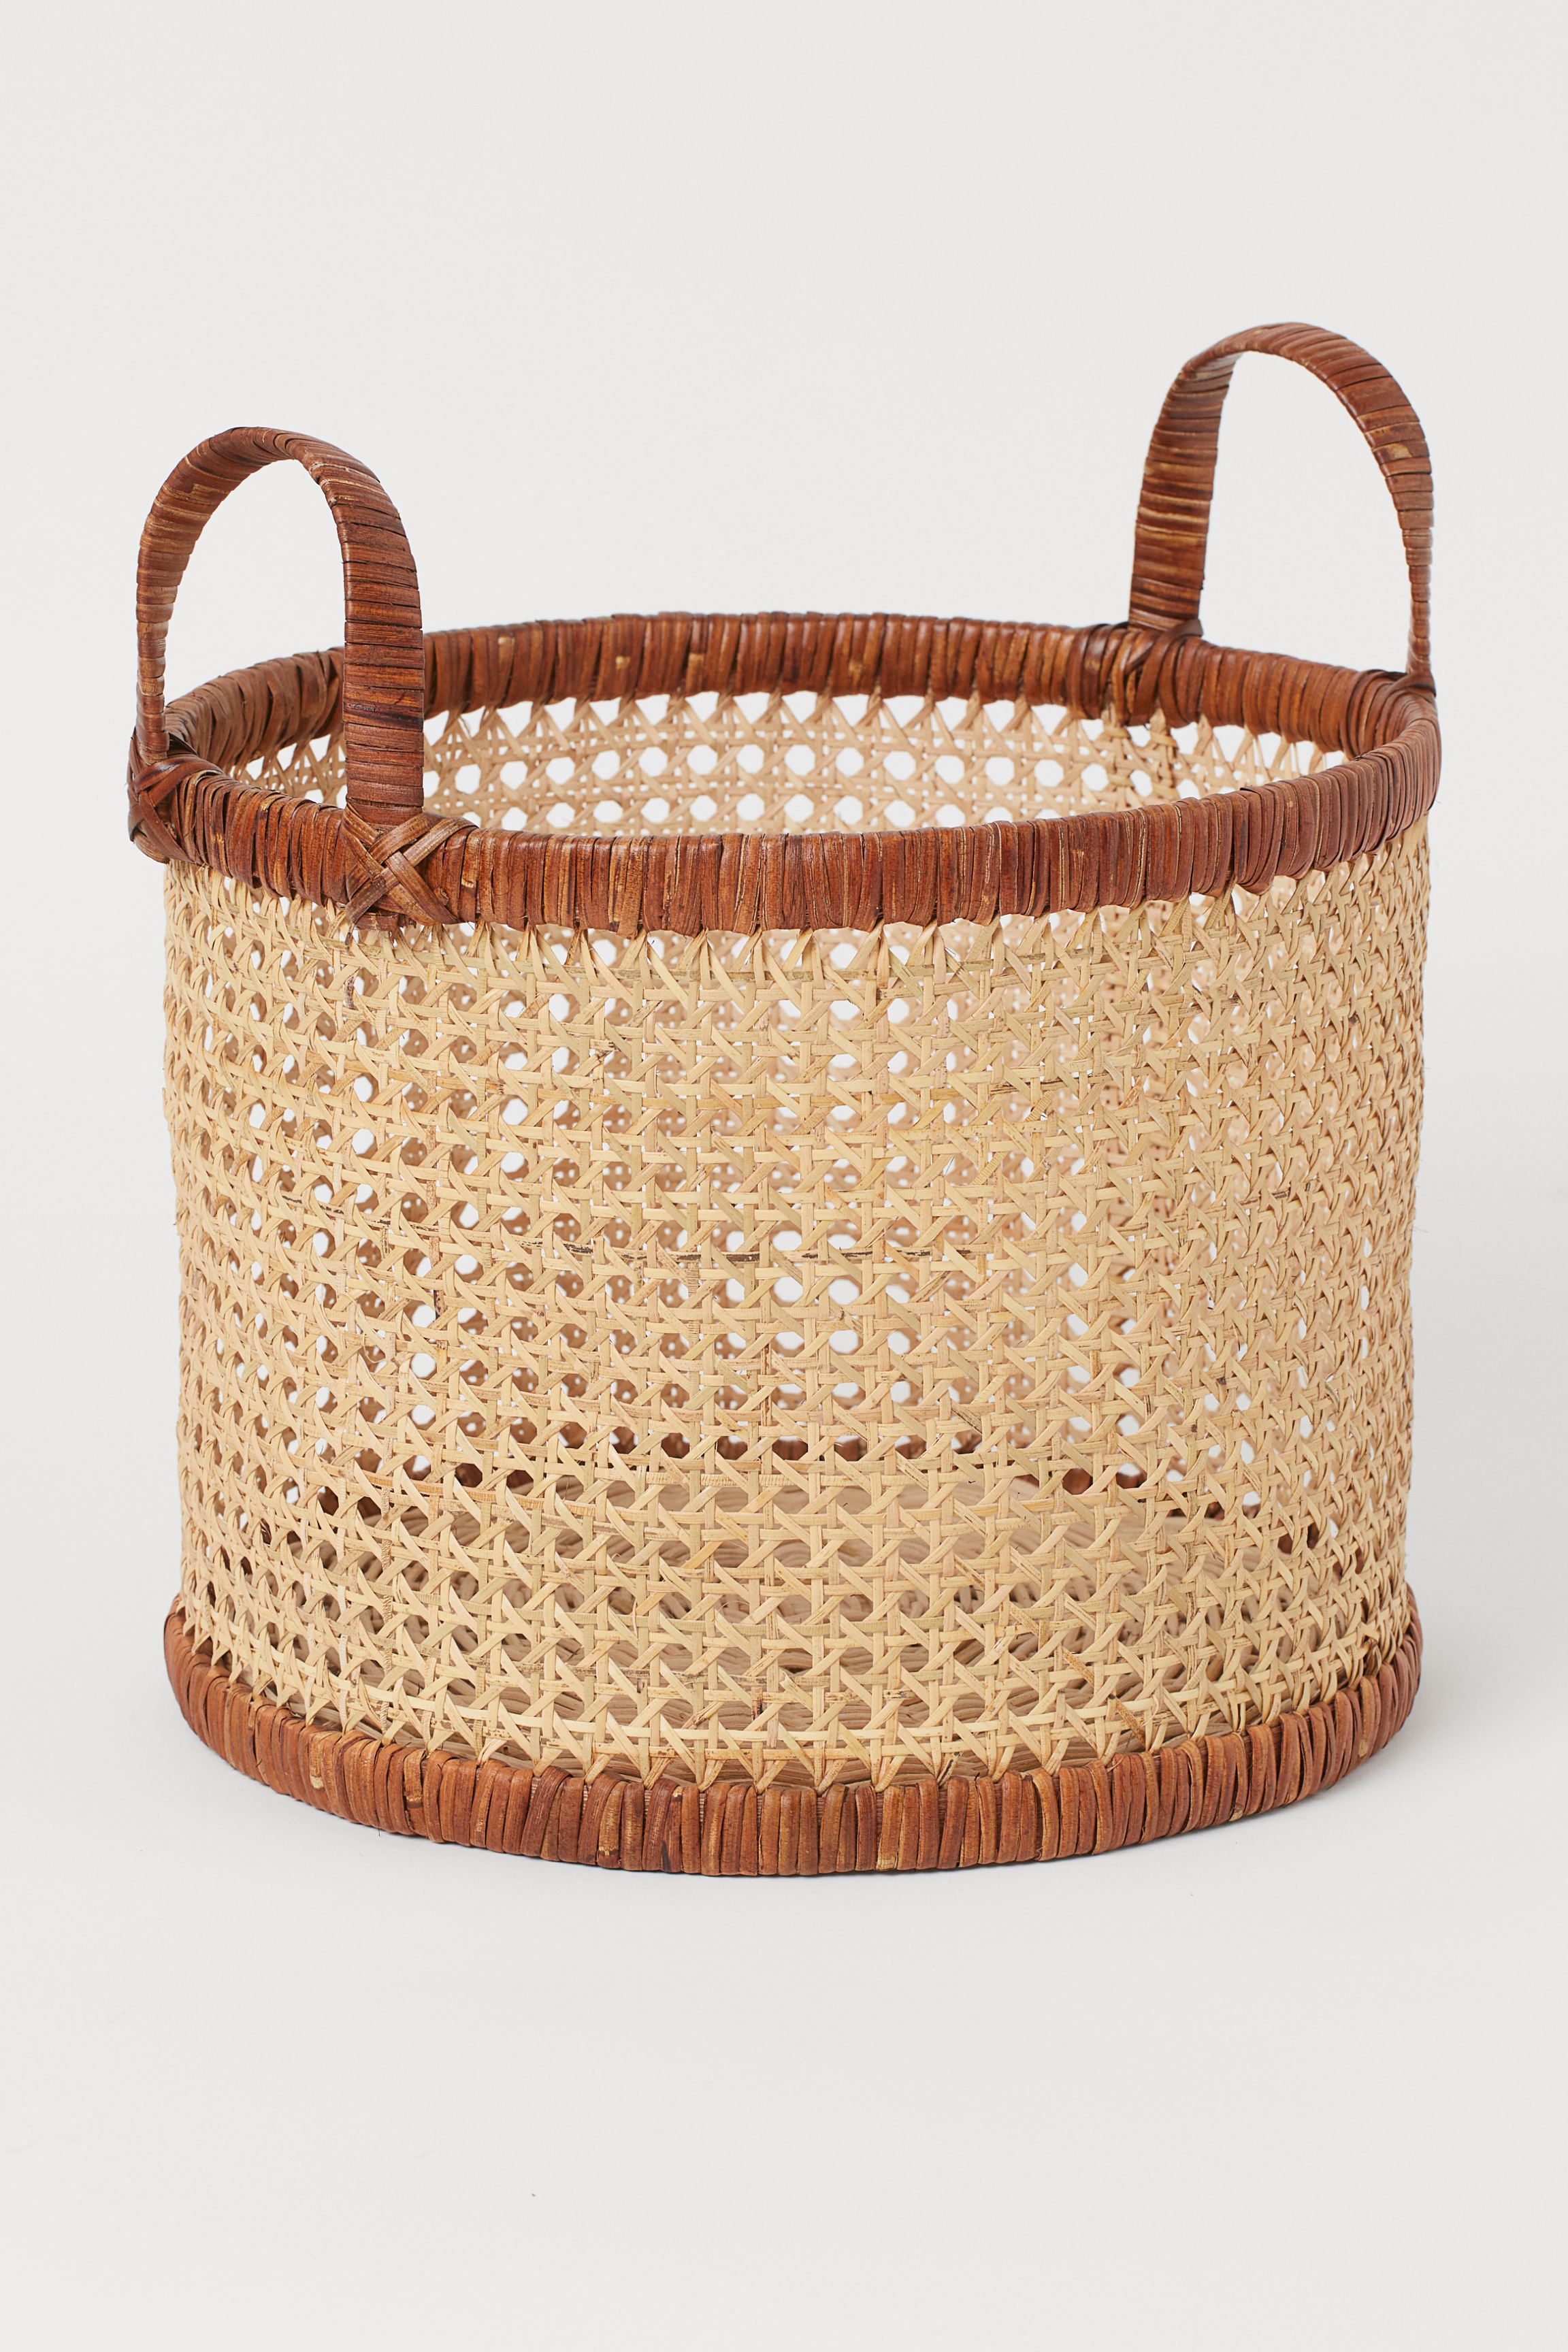 Rattan Furniture Is All Over Instagram. Here’s What To Buy, From £18-£245